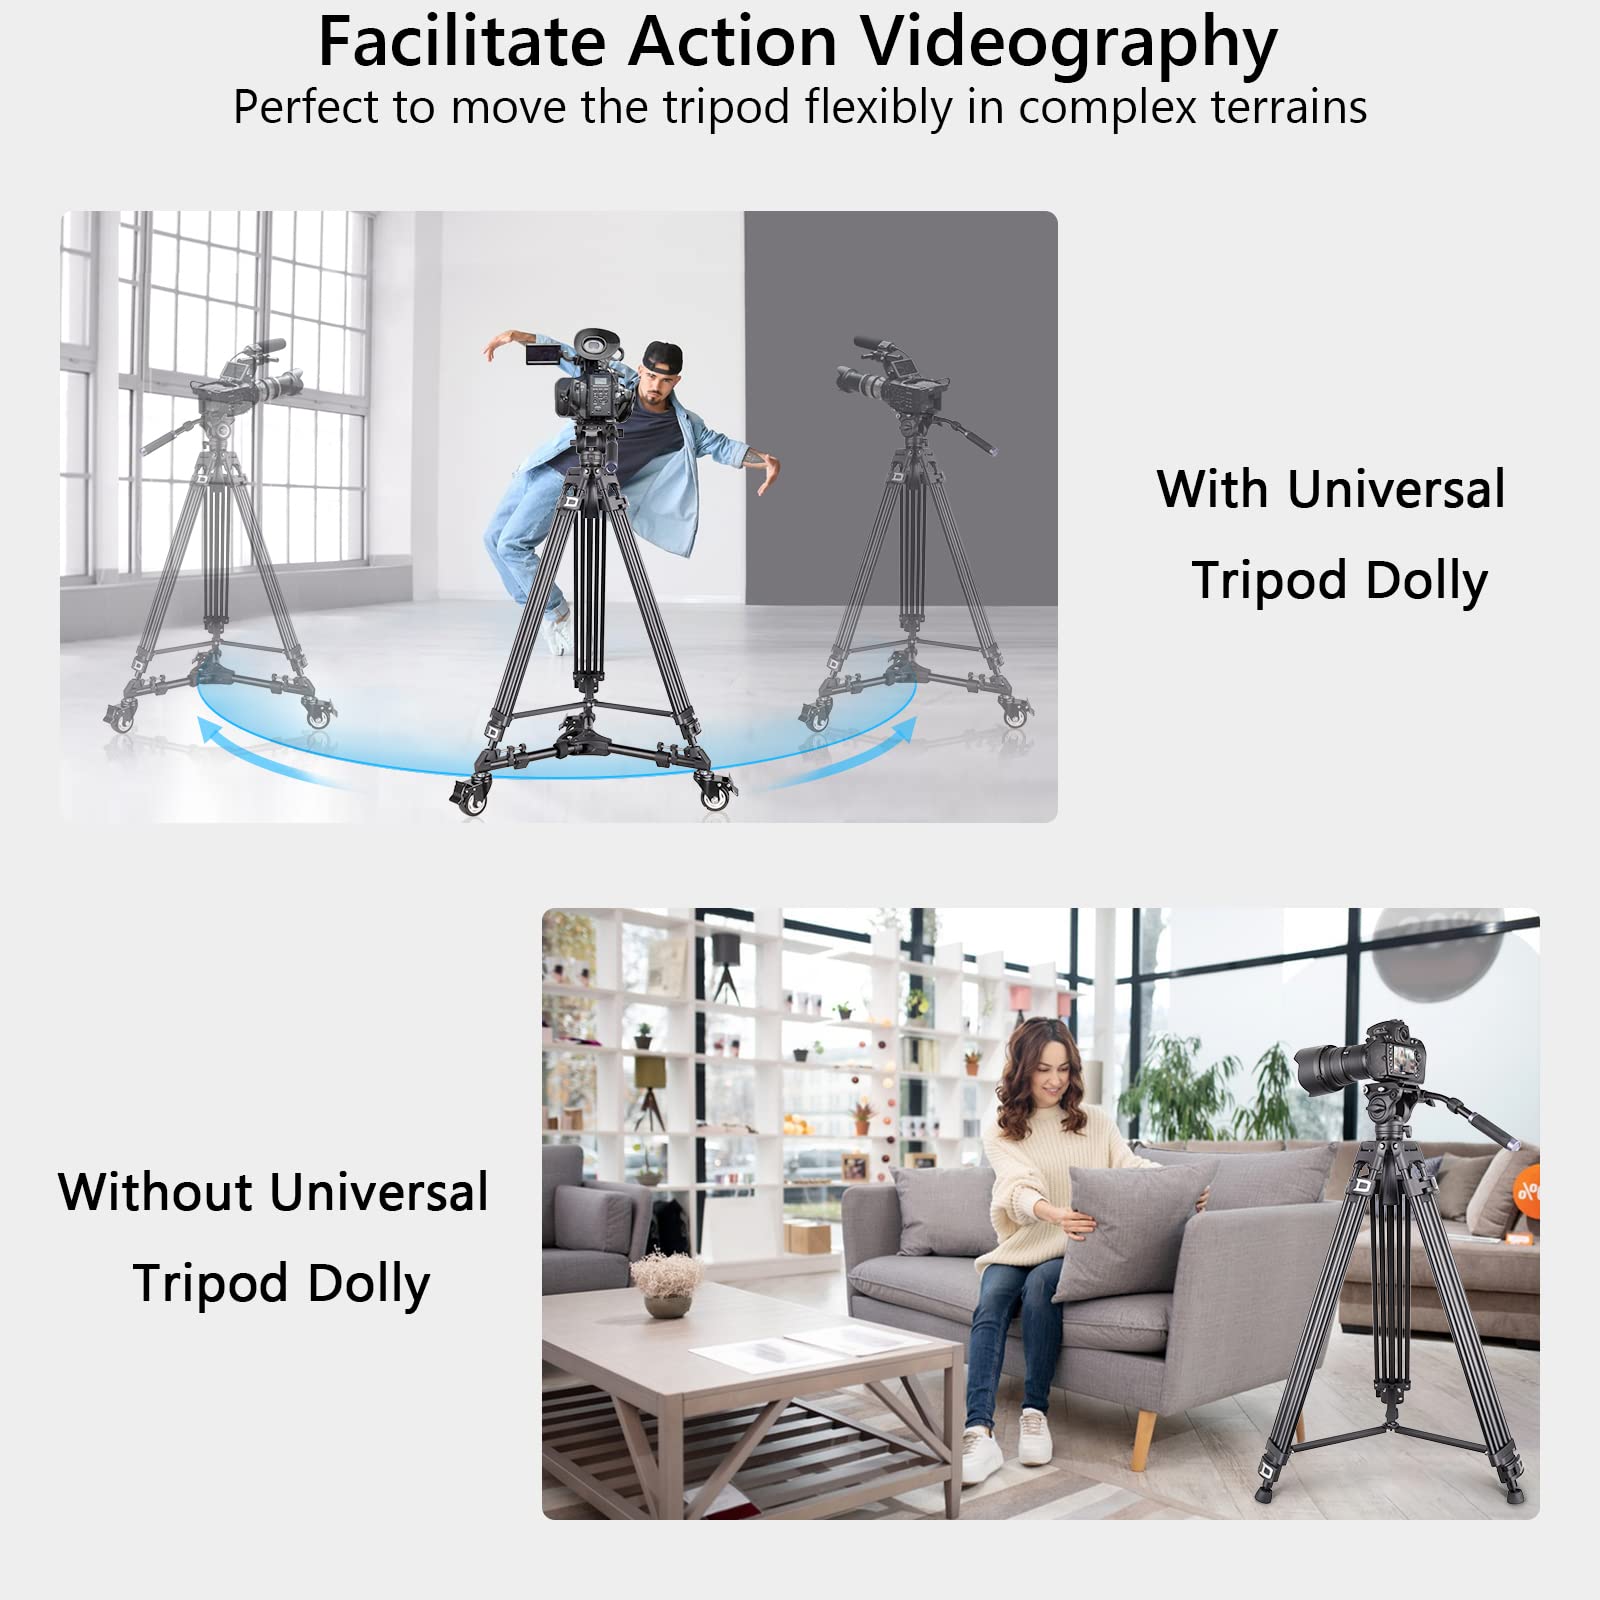 Video Tripod with Heavy Duty Tripod Dolly ARTCISE Professional Heavy Duty Tripod for DSLR Cameras Video Camcorders, Load Capacity Up to 20 Pounds …